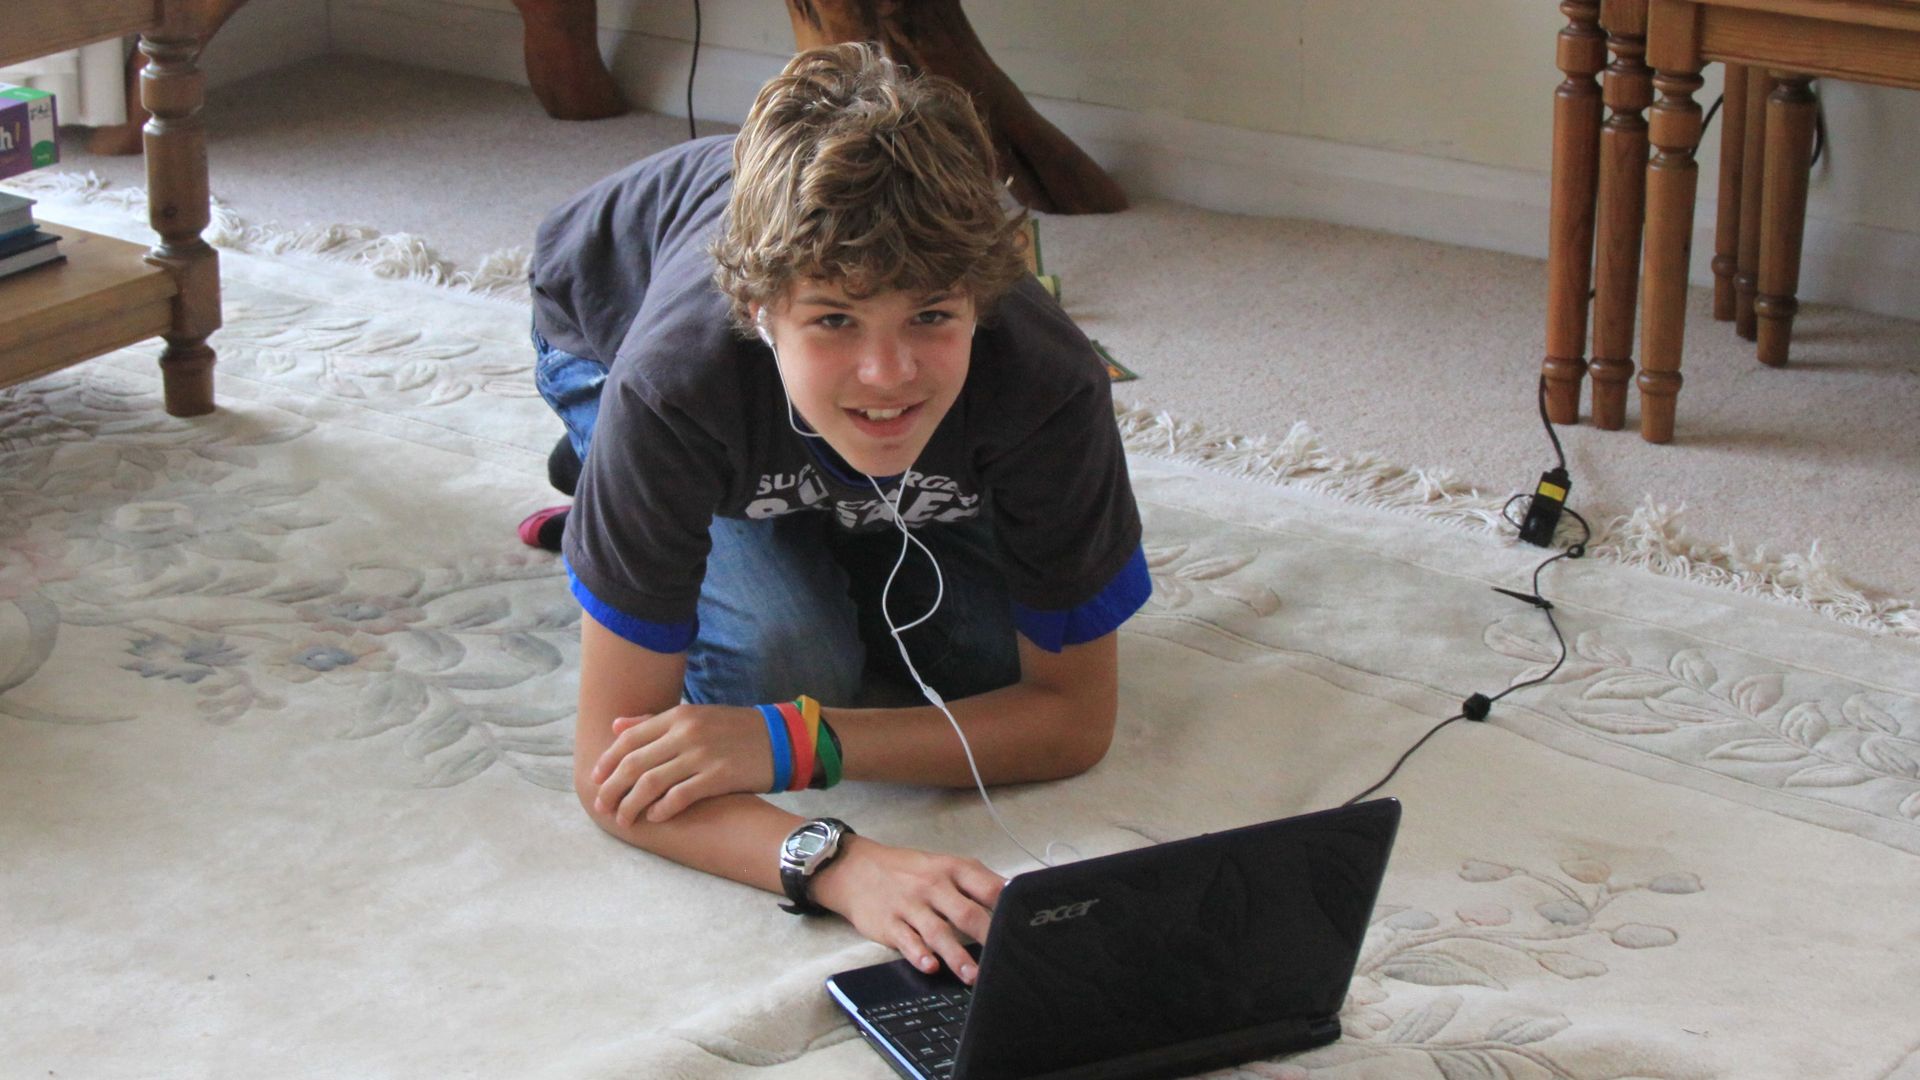 Breck on his laptop at home